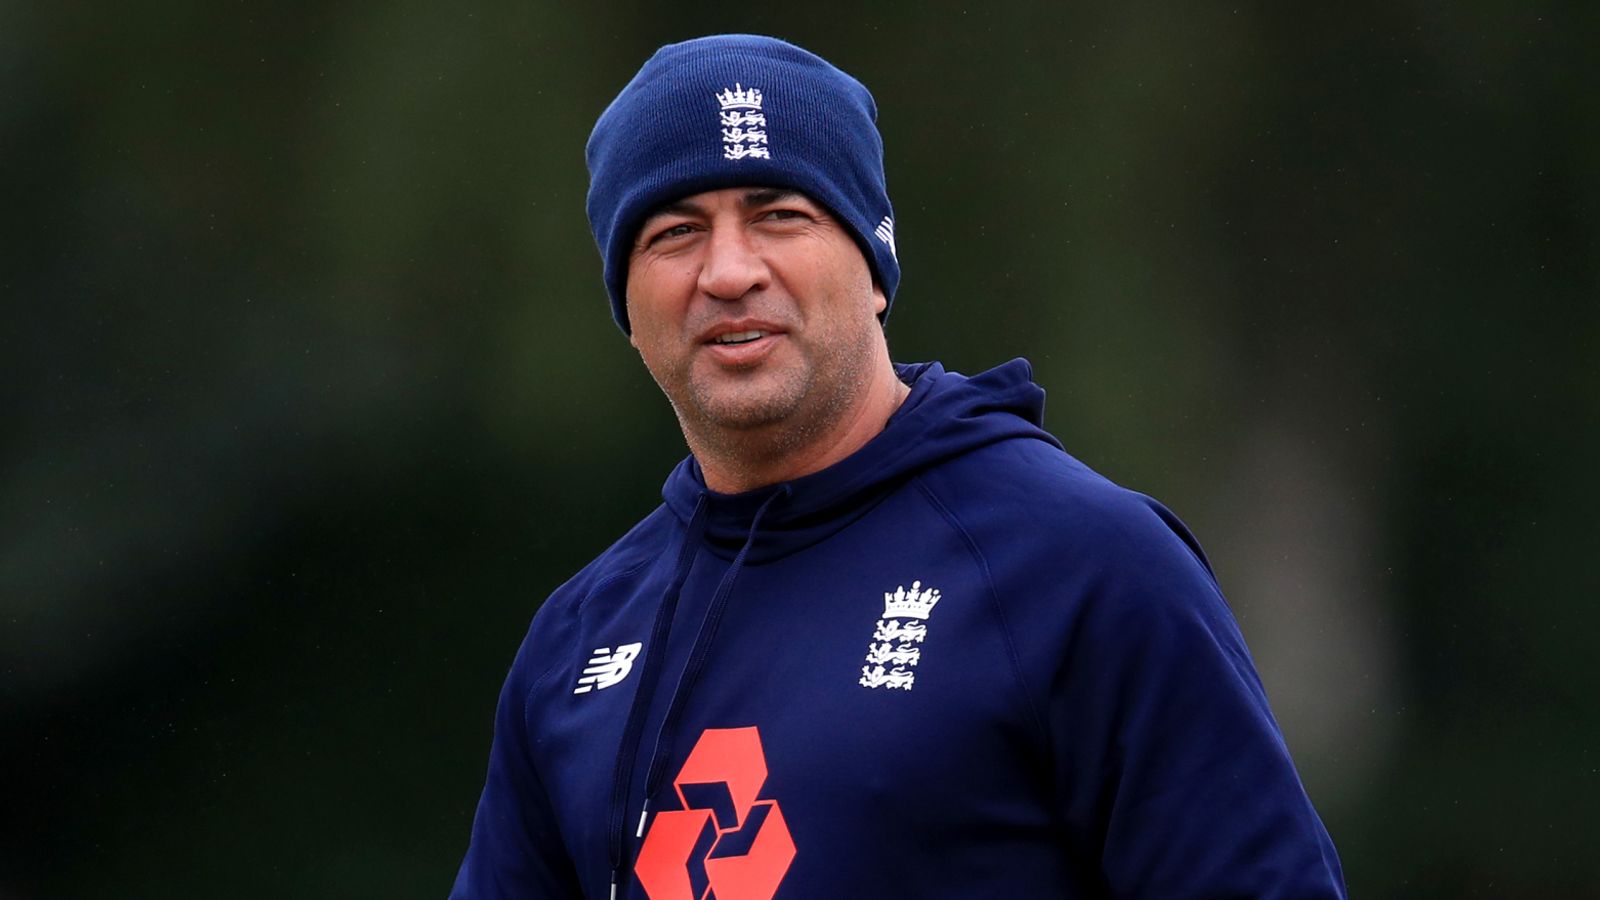 The Ashes: Adam Hollioake no longer joining England coaching staff for fourth Test due to Covid contact